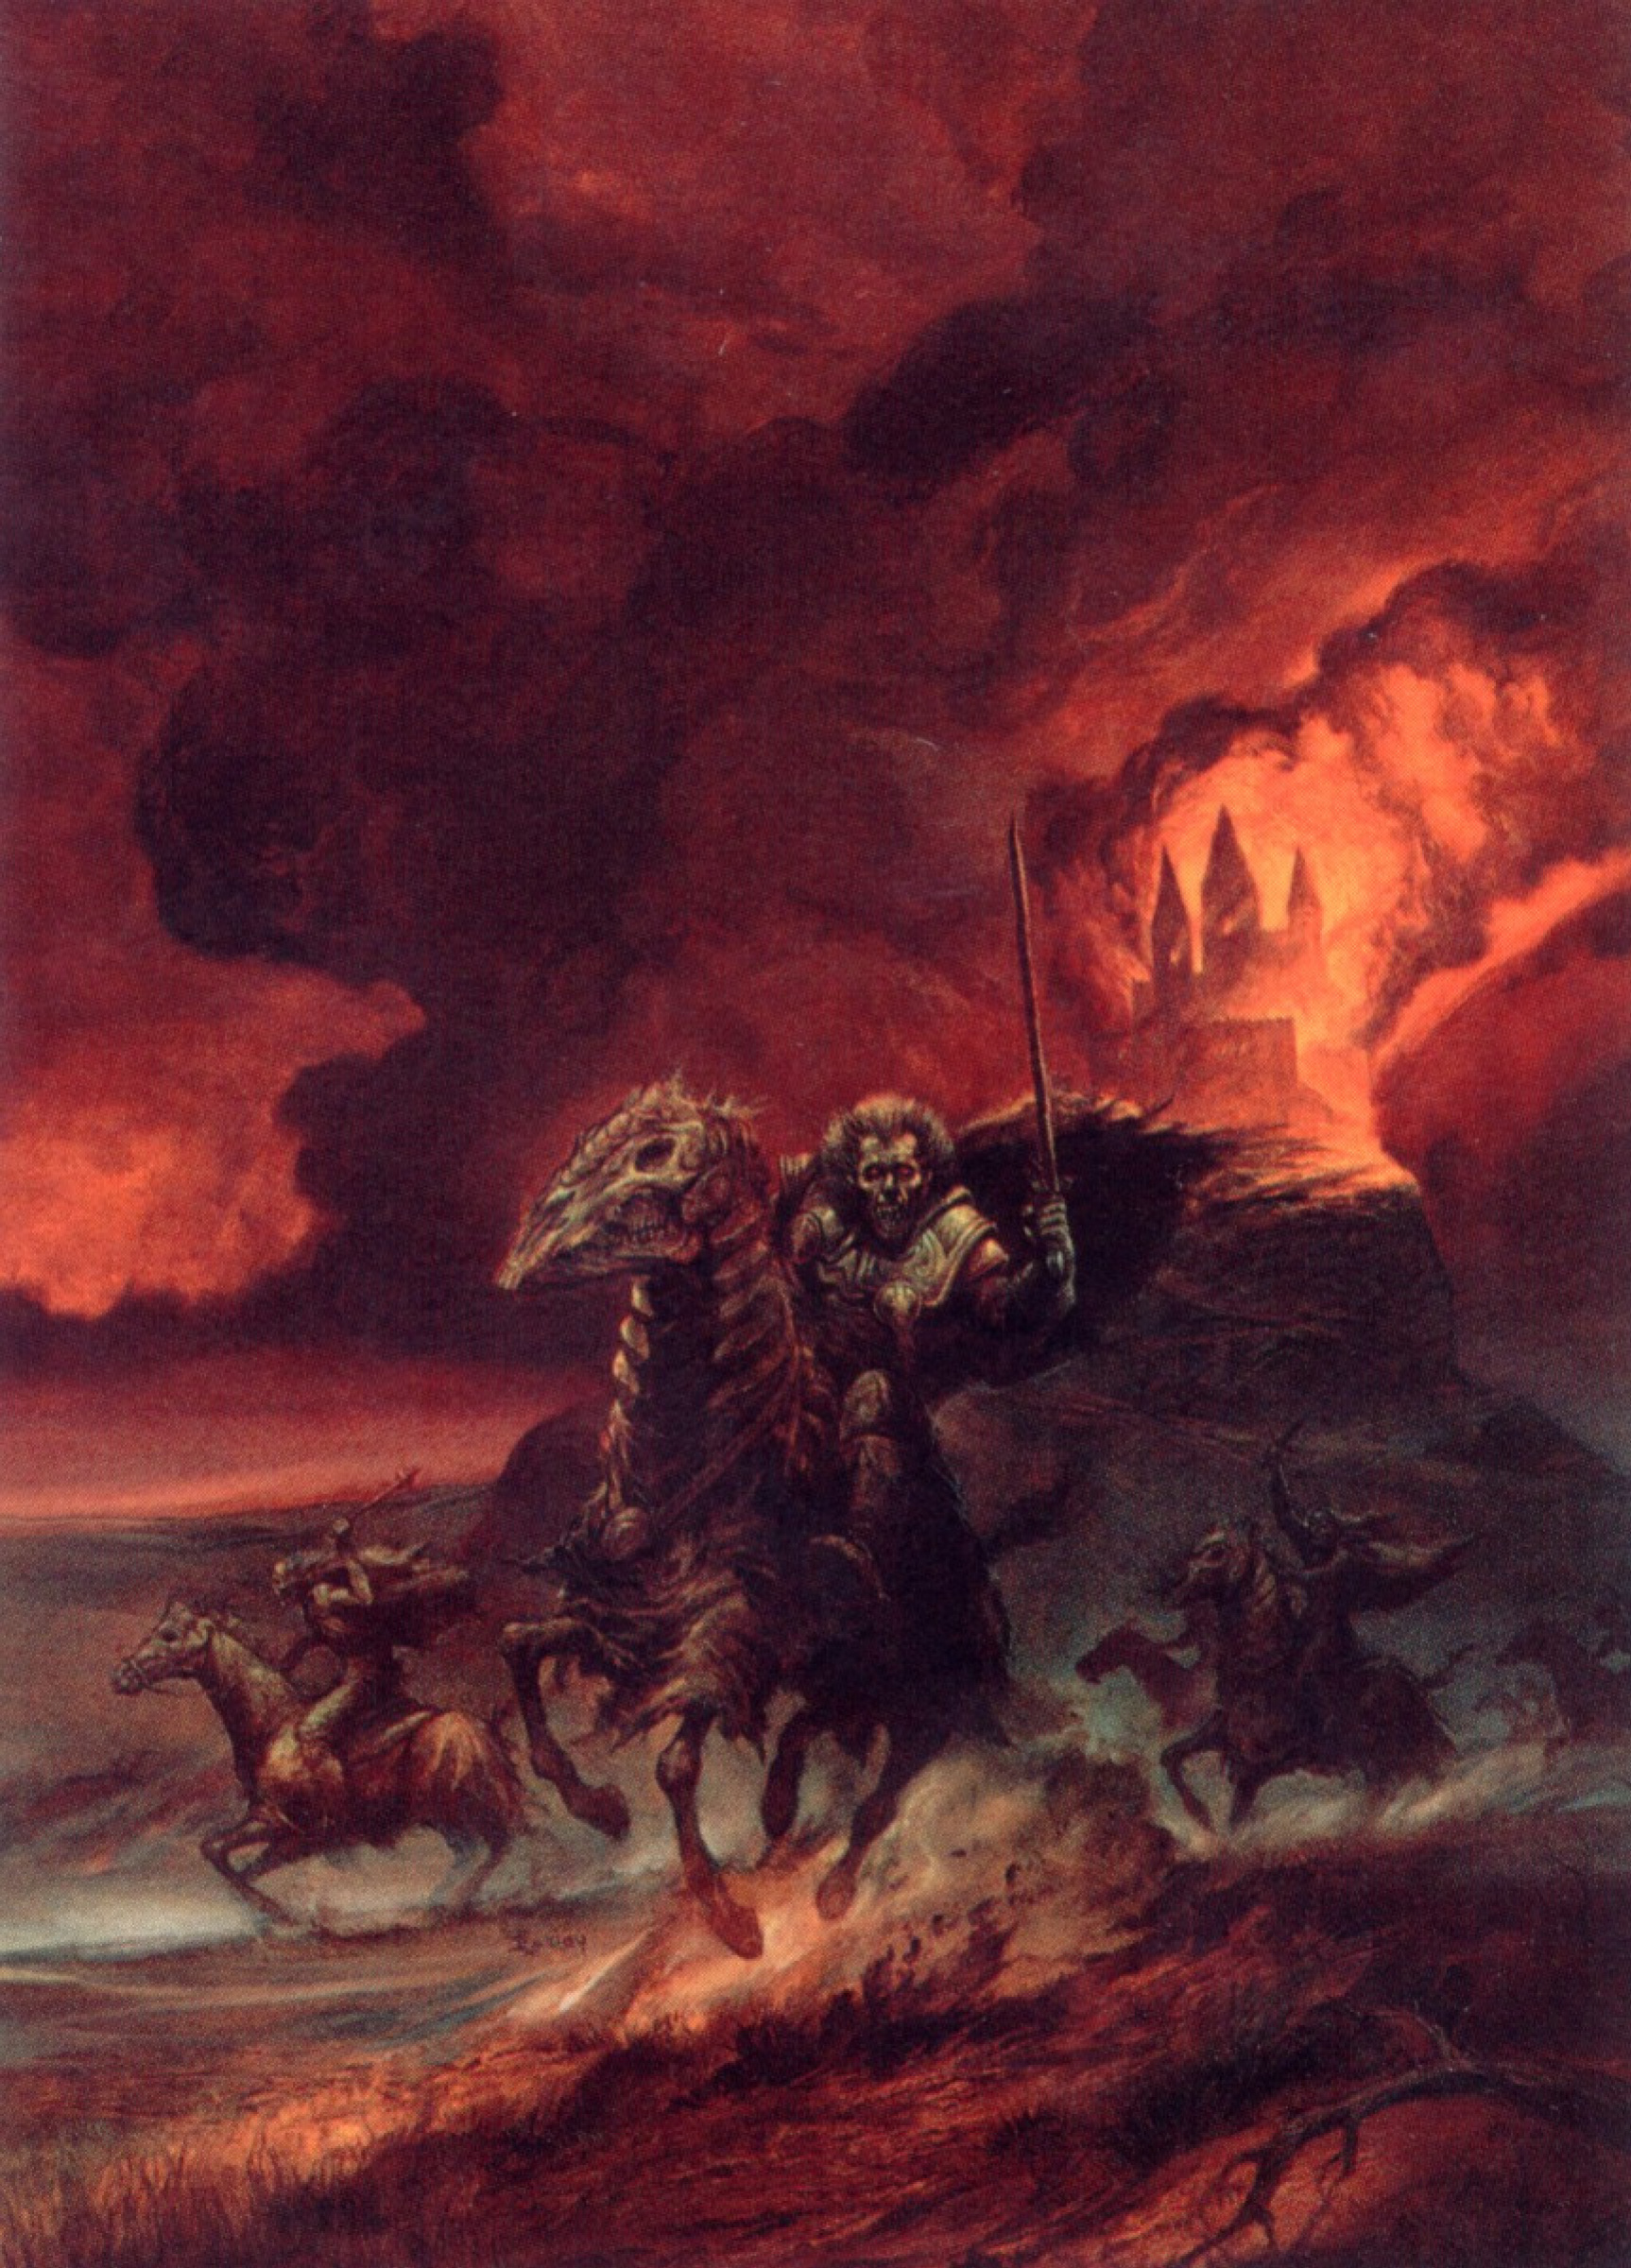 Sold at Auction: Jeff Easley, Jeff Easley, Cover Painting to Gamma World